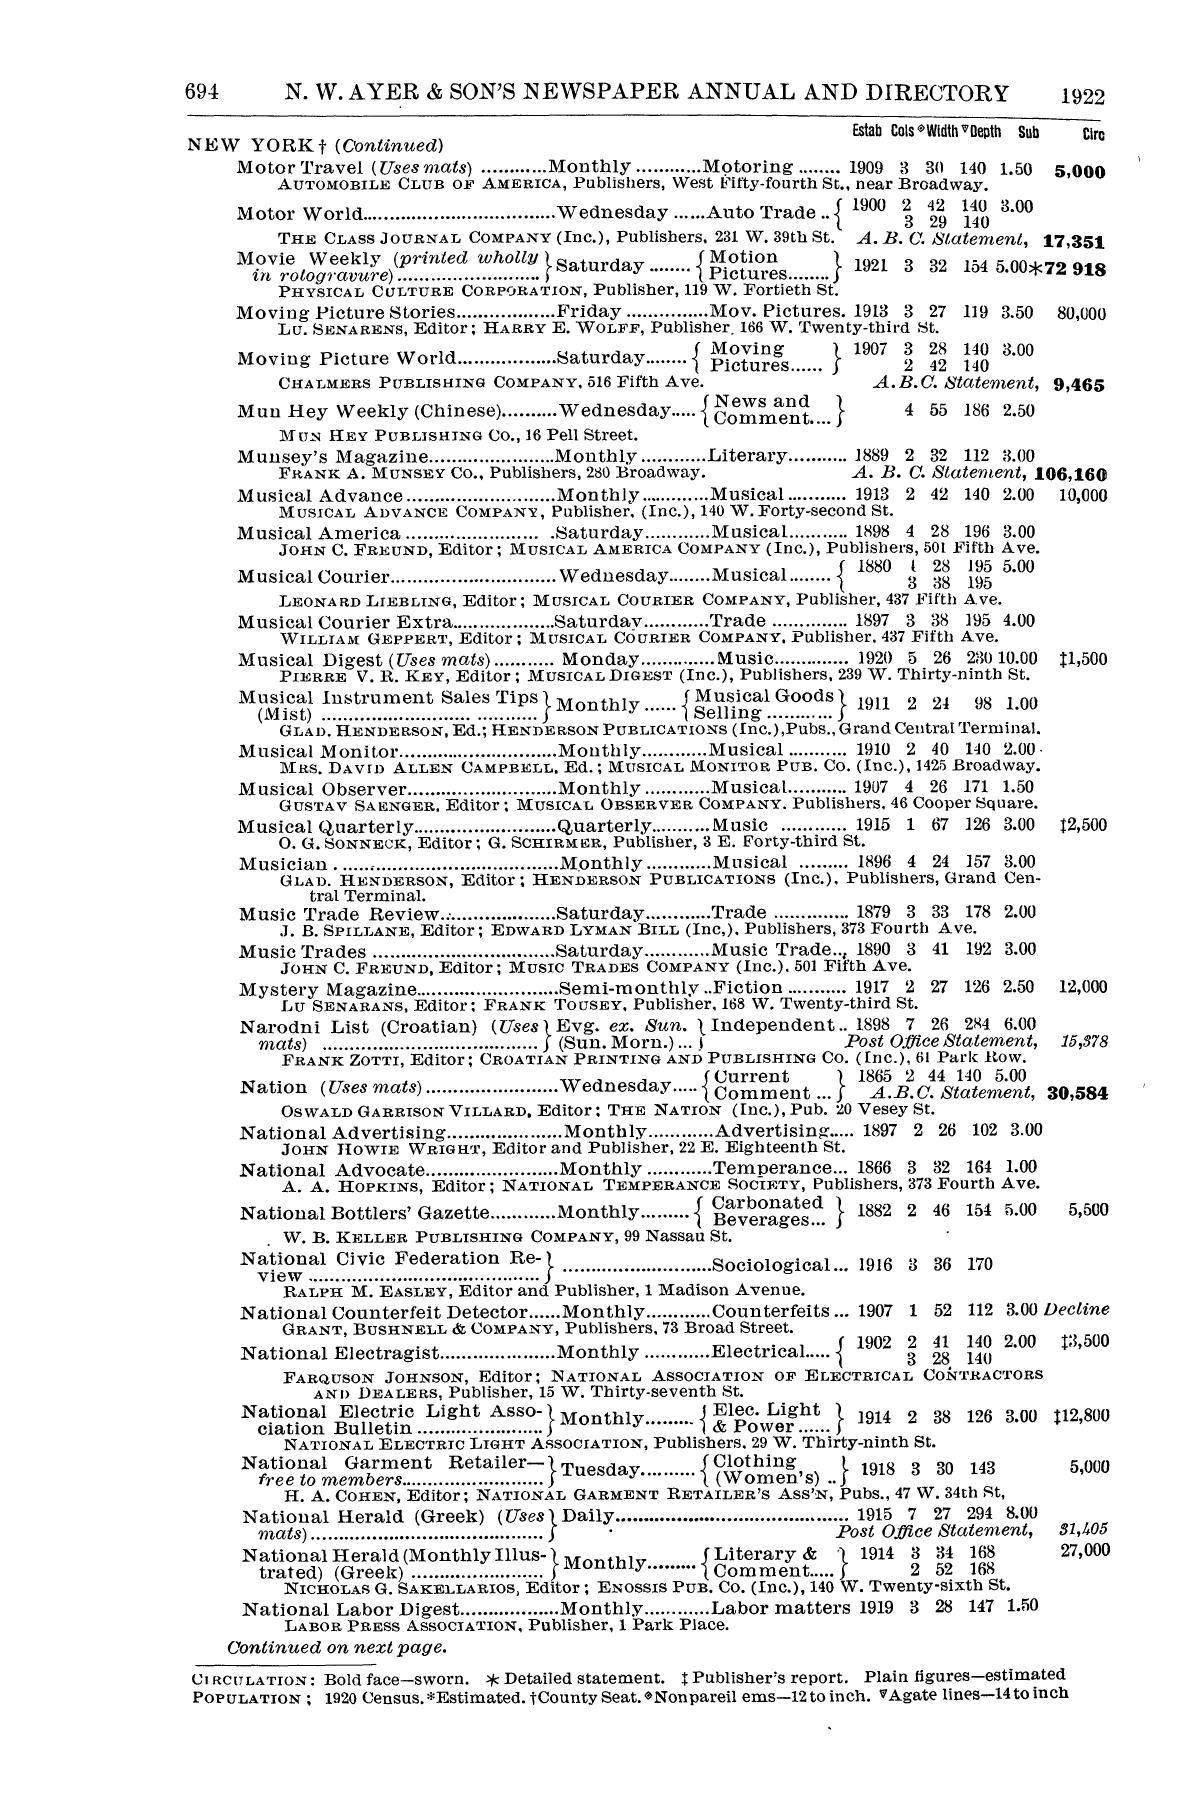 N. W. Ayer & Son's American Newspaper Annual and Directory: A Catalogue of American Newspapers, 1922, Volume 2
                                                
                                                    694
                                                